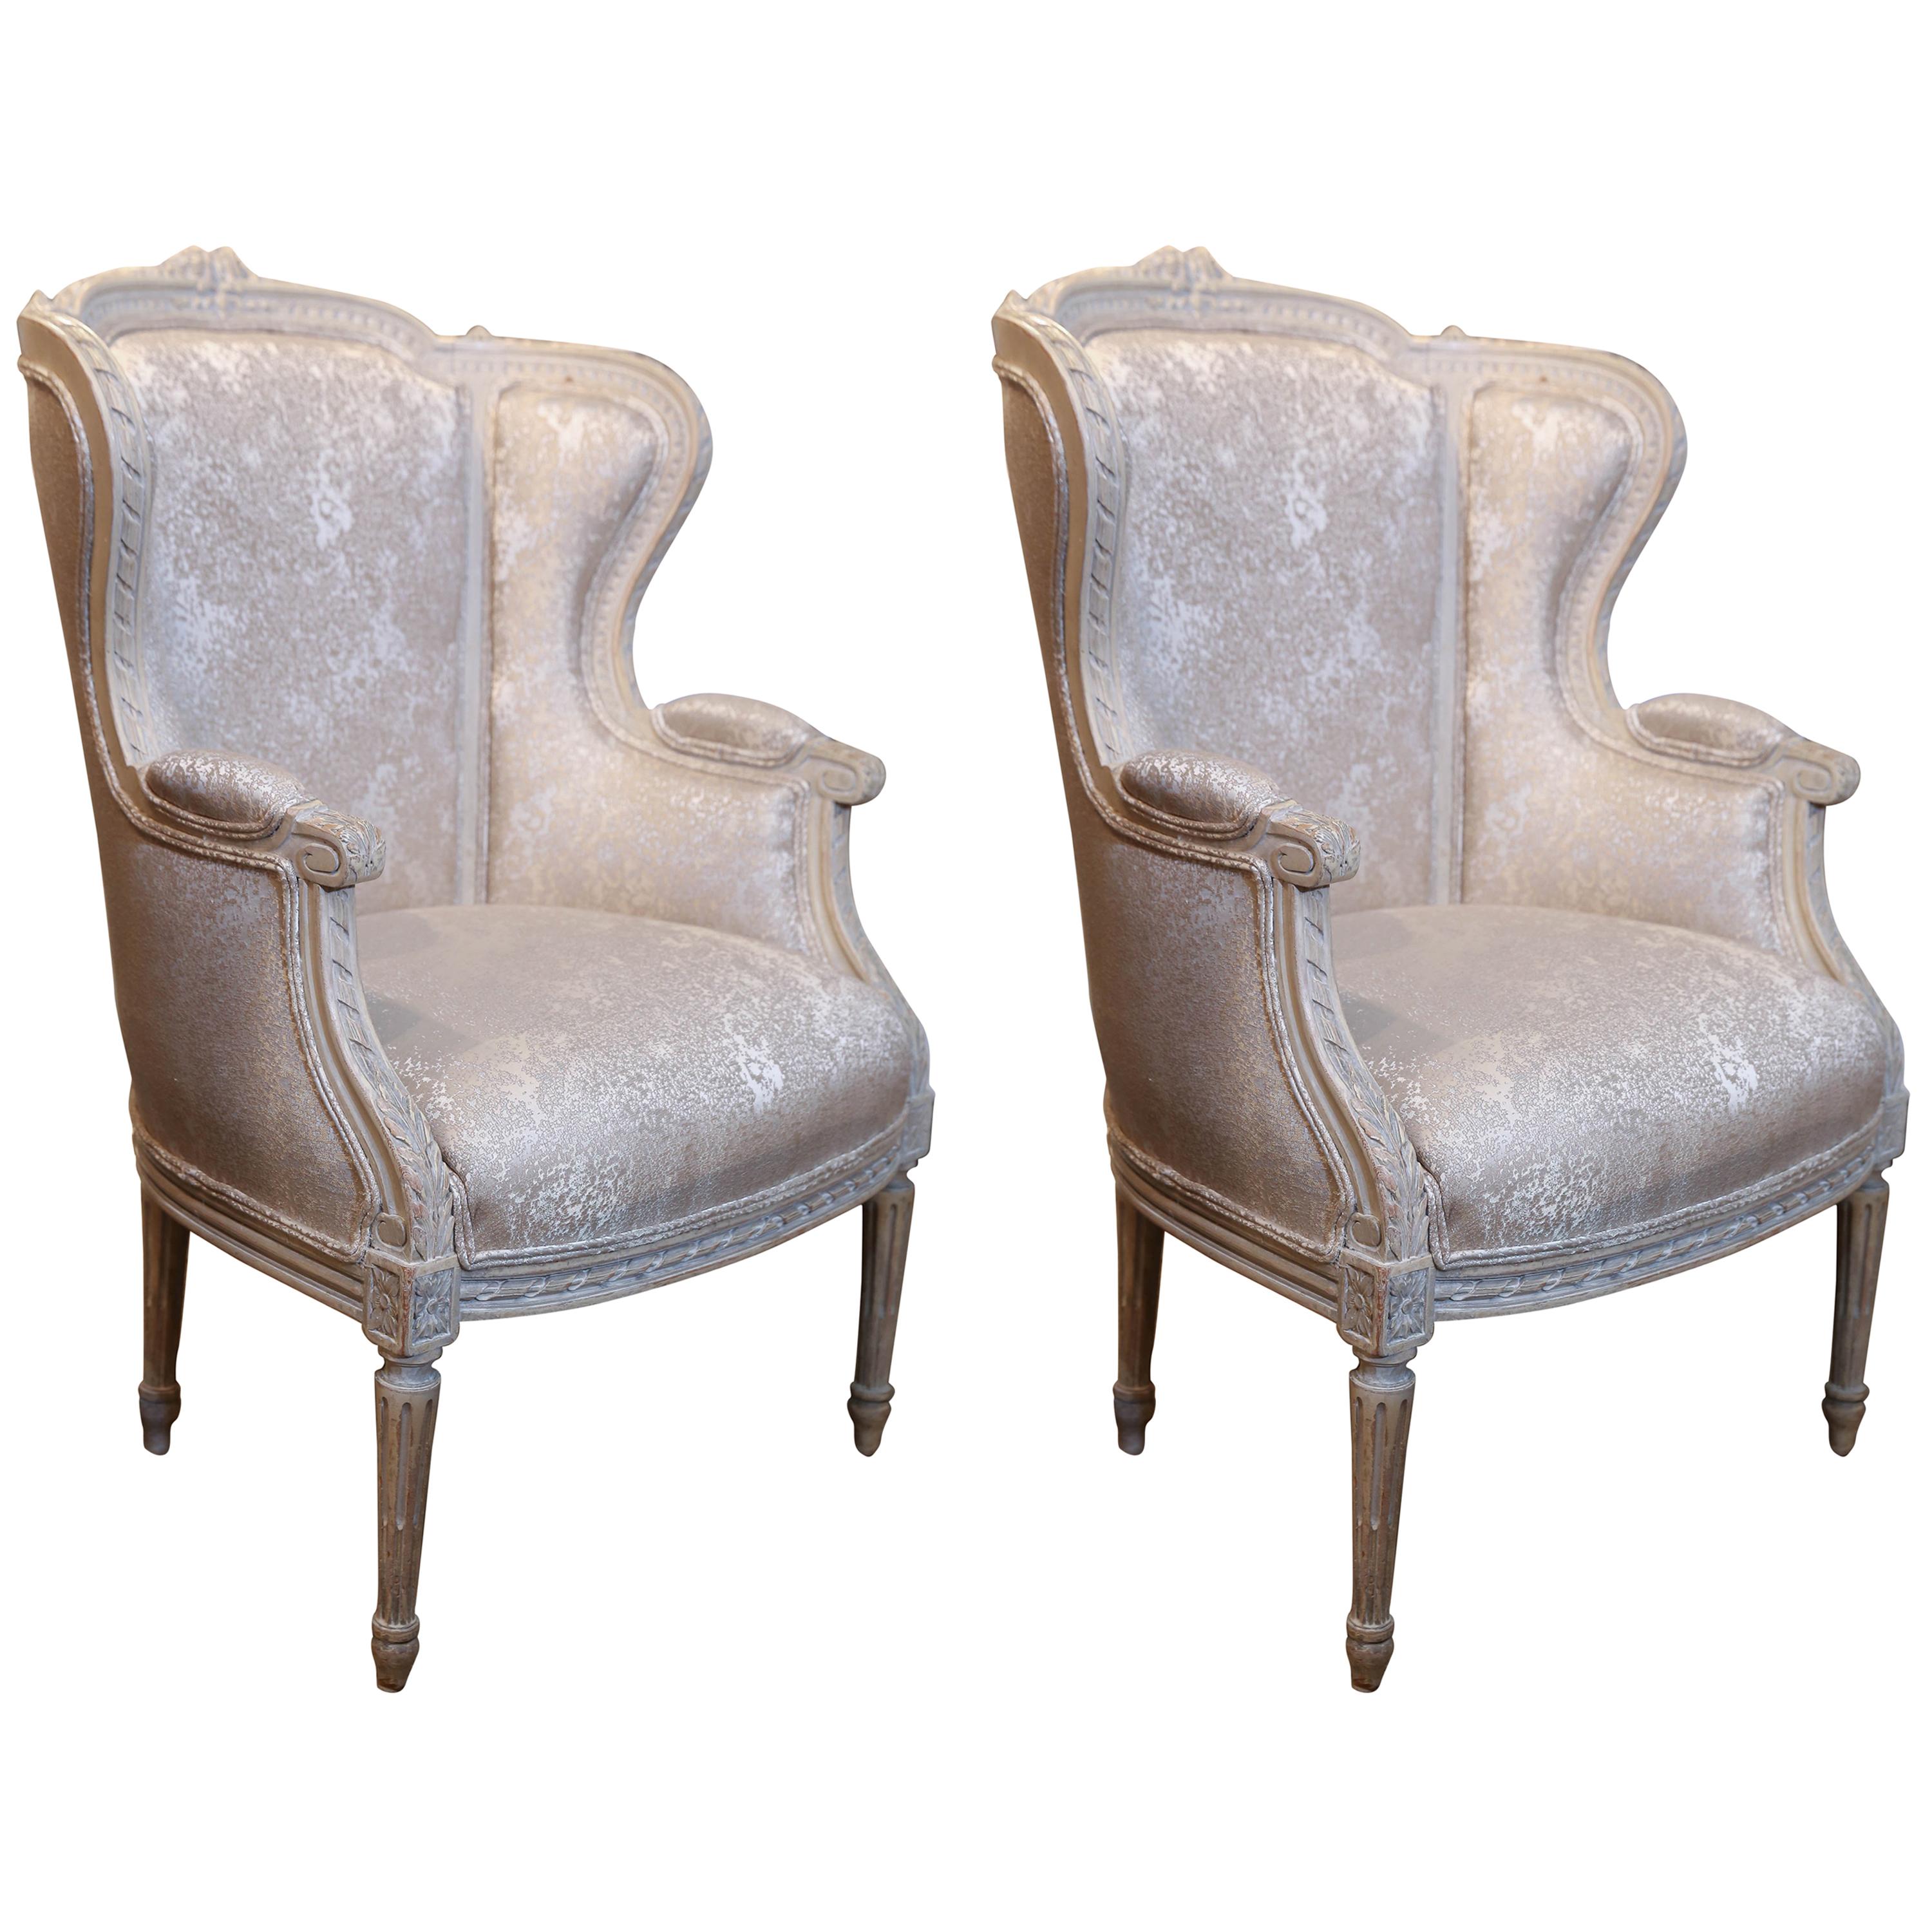 Pair of French Louis XVI Style Wing Back Chairs